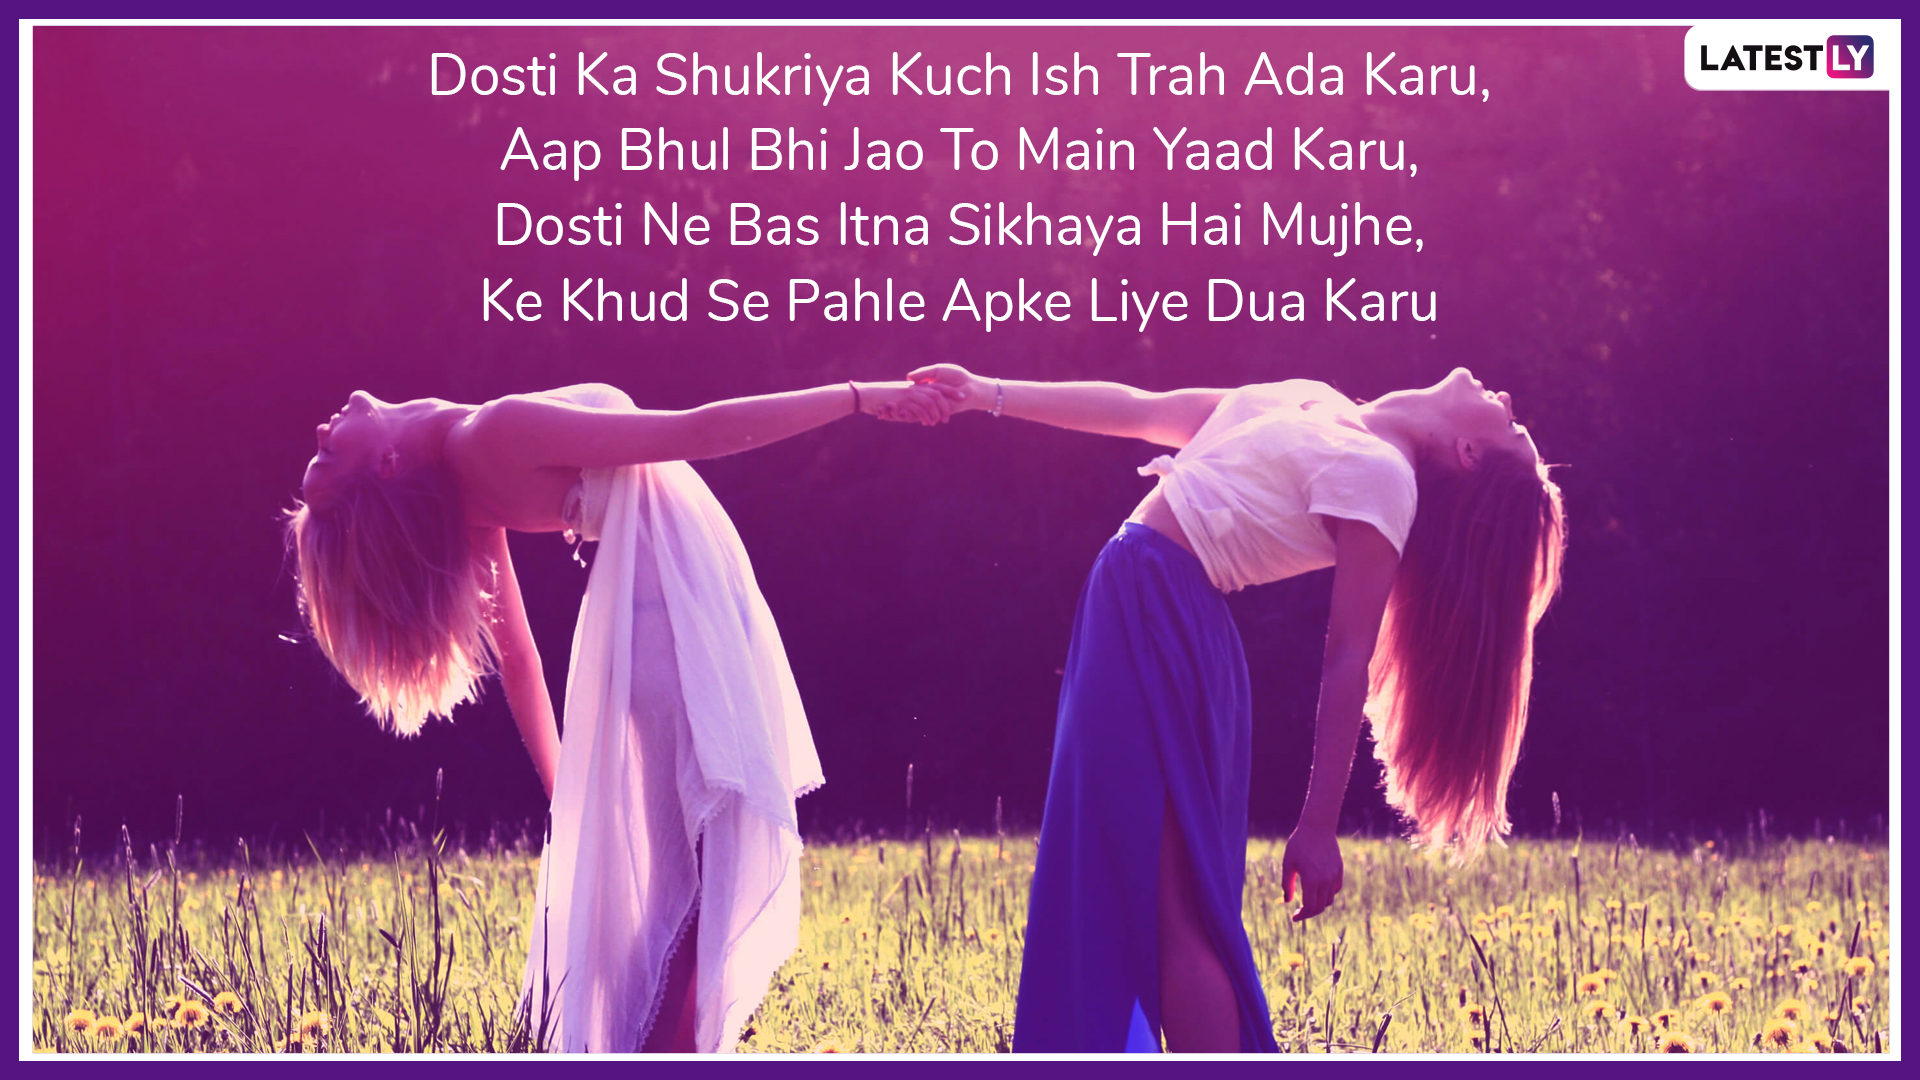 5 Best Happy Friendship Day Quotes and Greetings Images